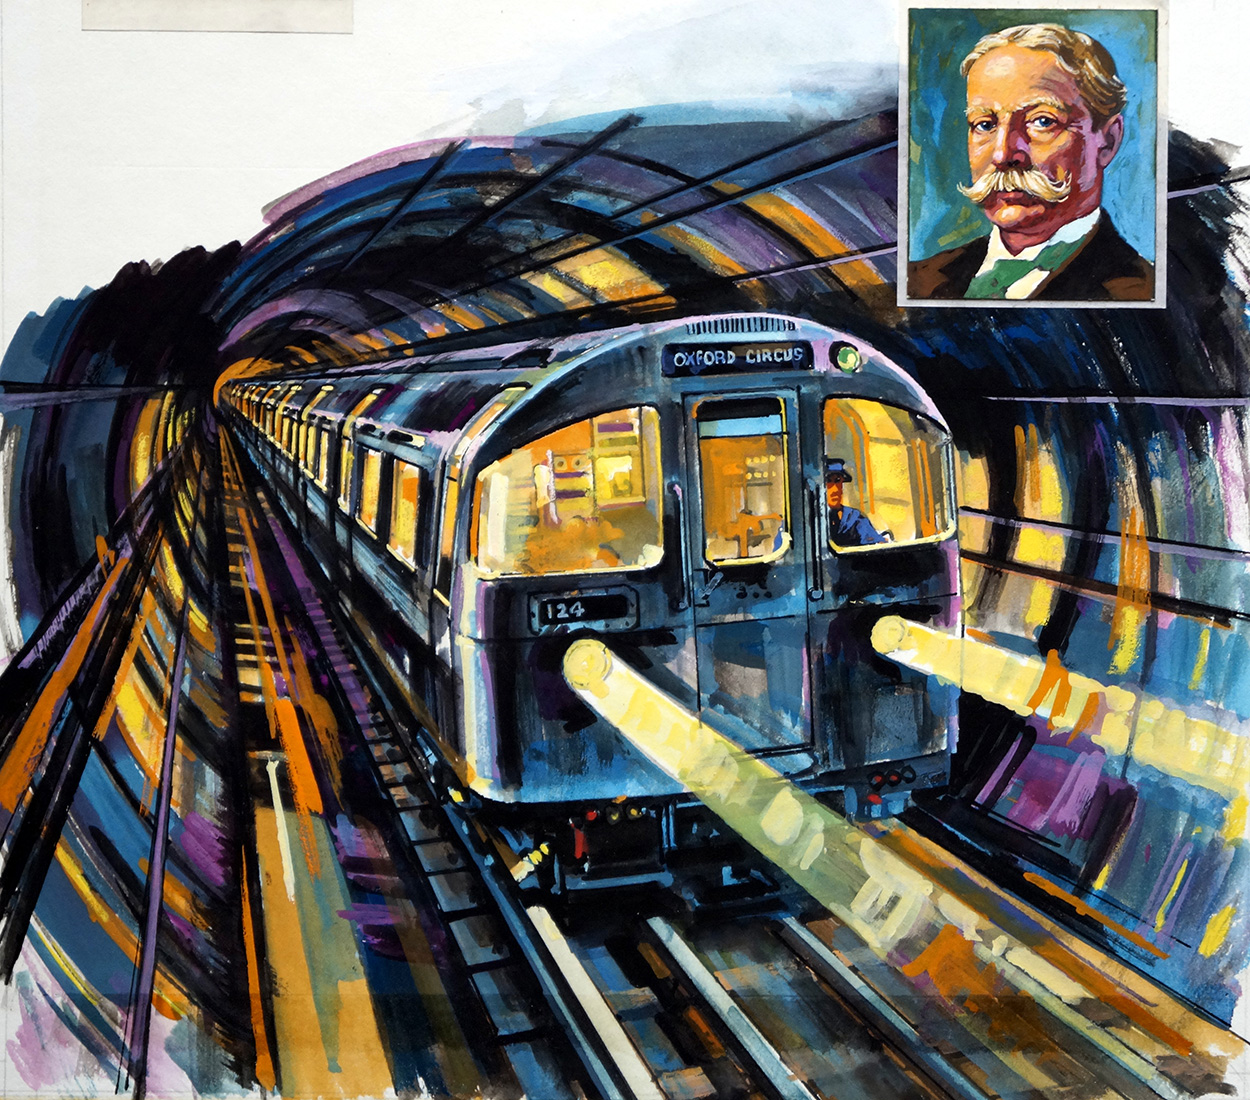 The Victoria Line - London Underground (Original) art by Harry Green Art at The Illustration Art Gallery